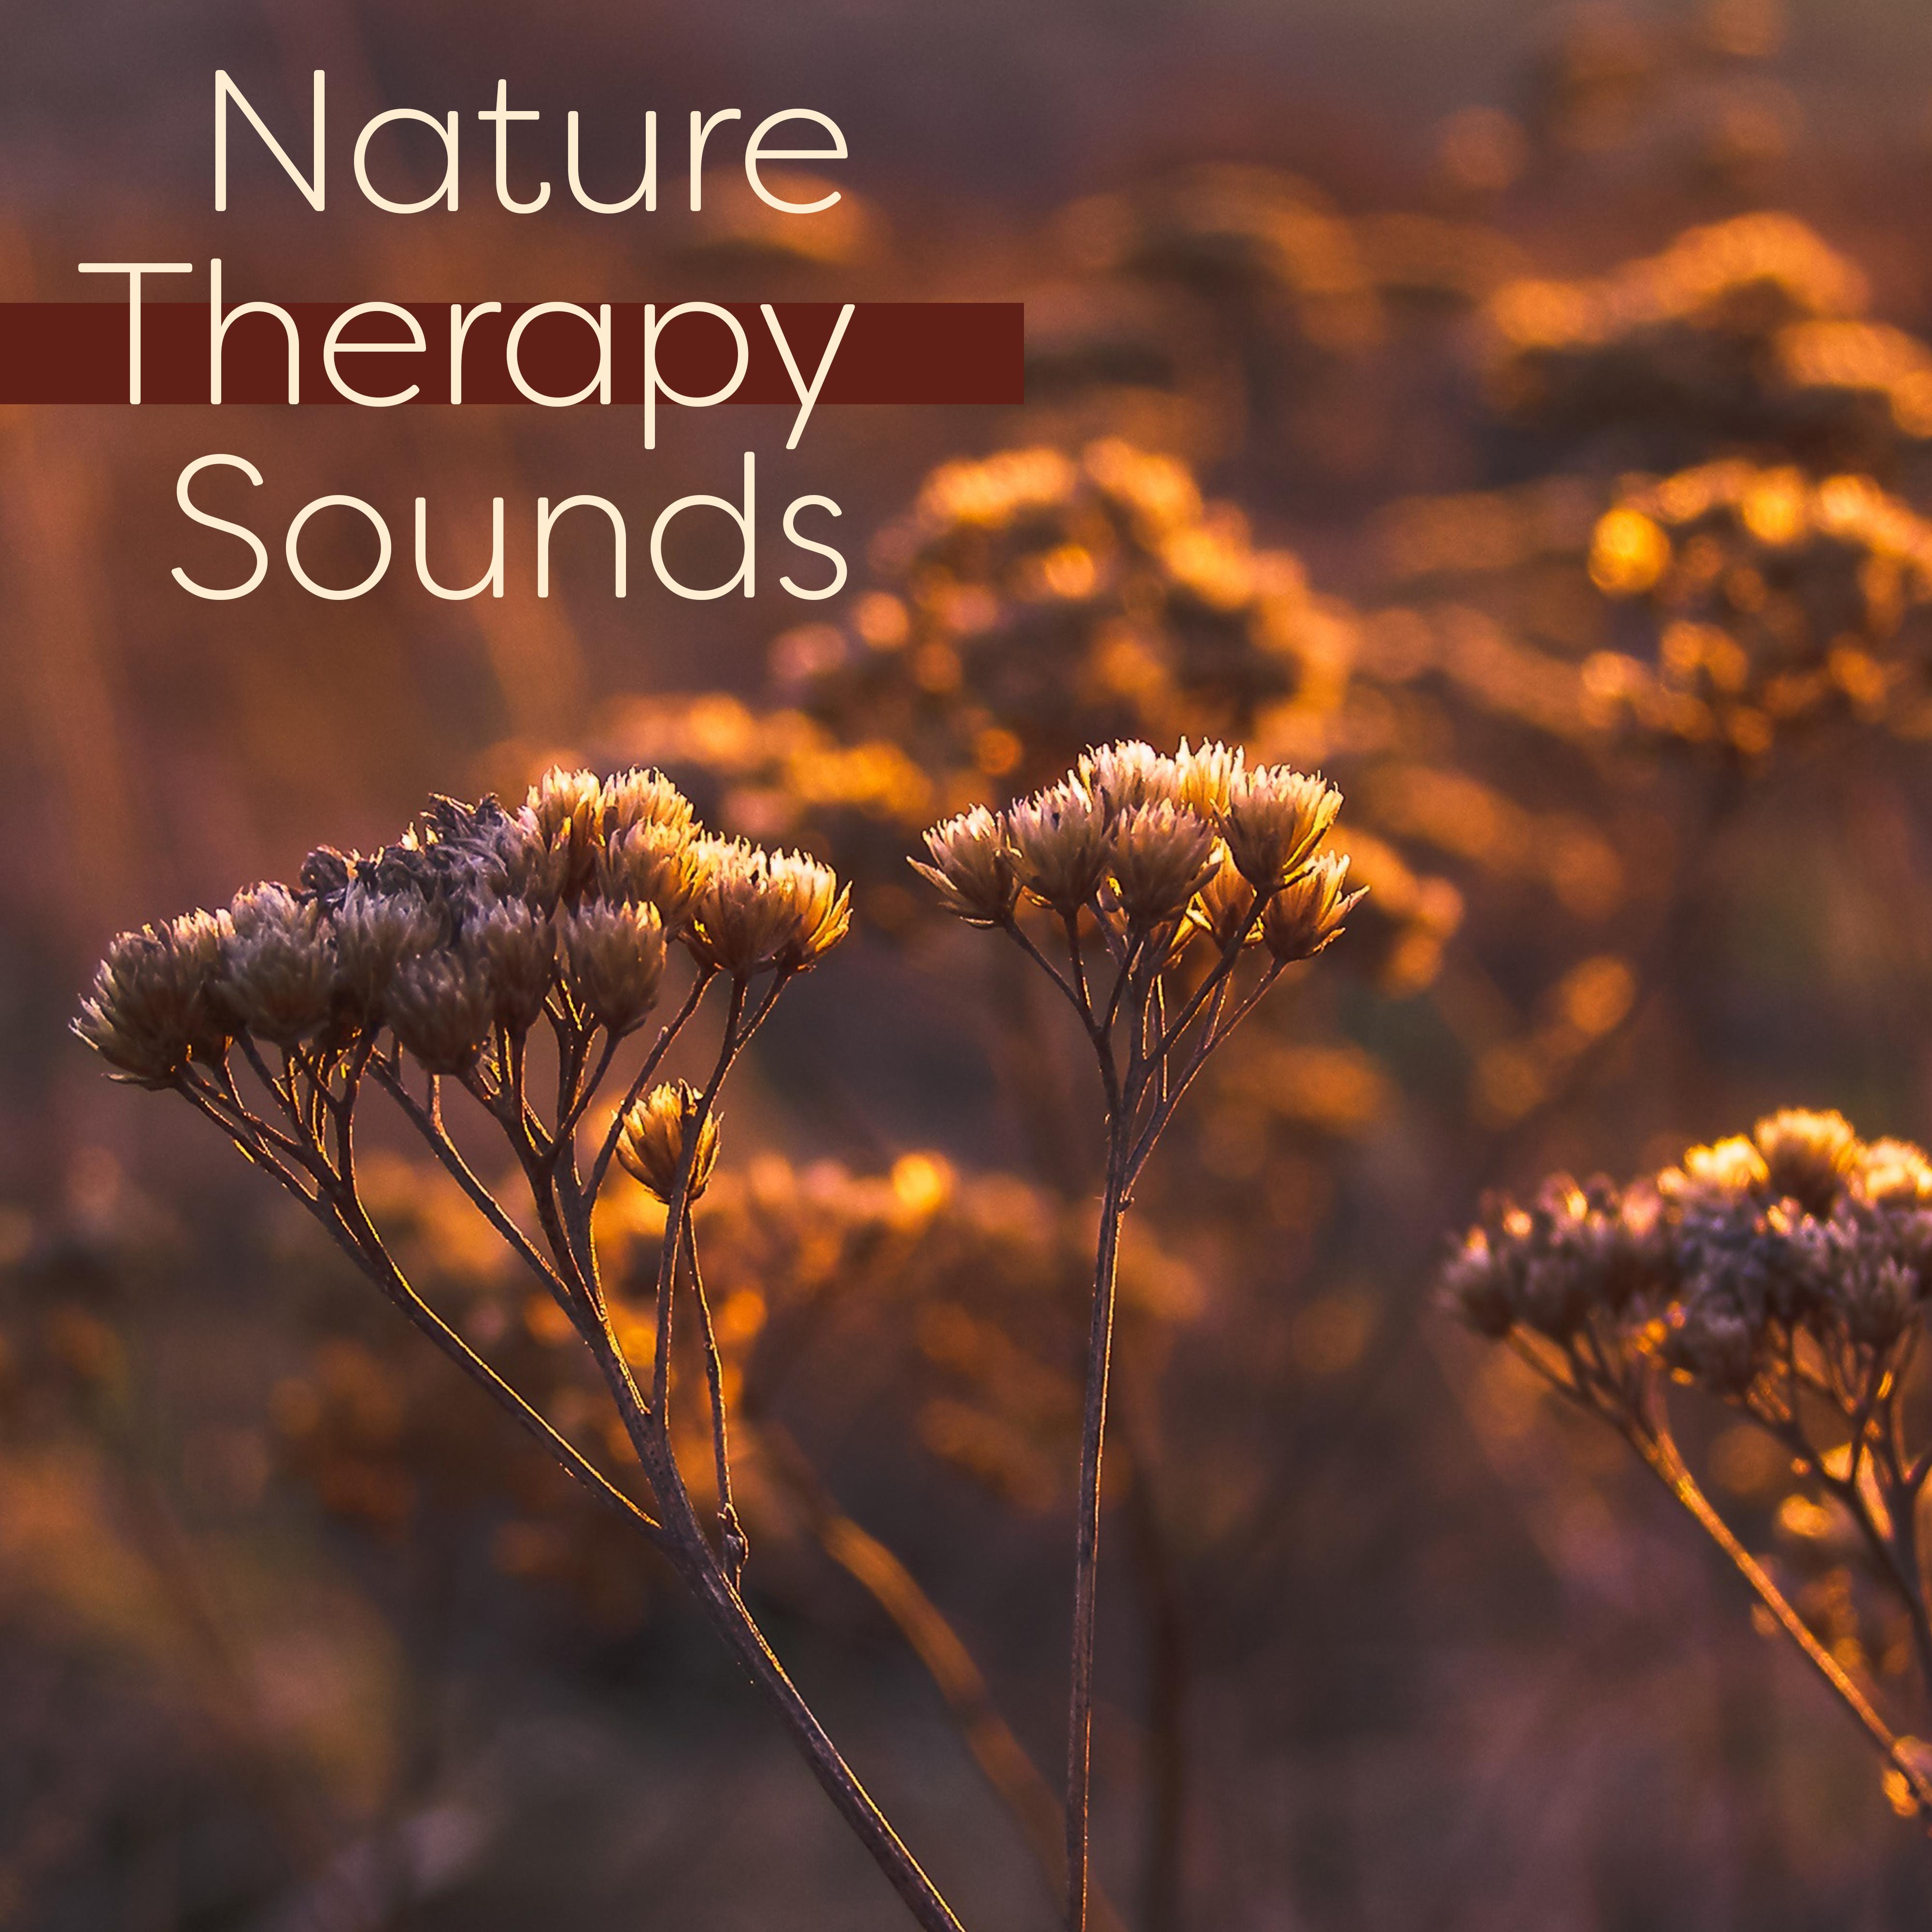 Nature Therapy Sounds – Music to Rest, Spirit Relaxation, Healing Waves